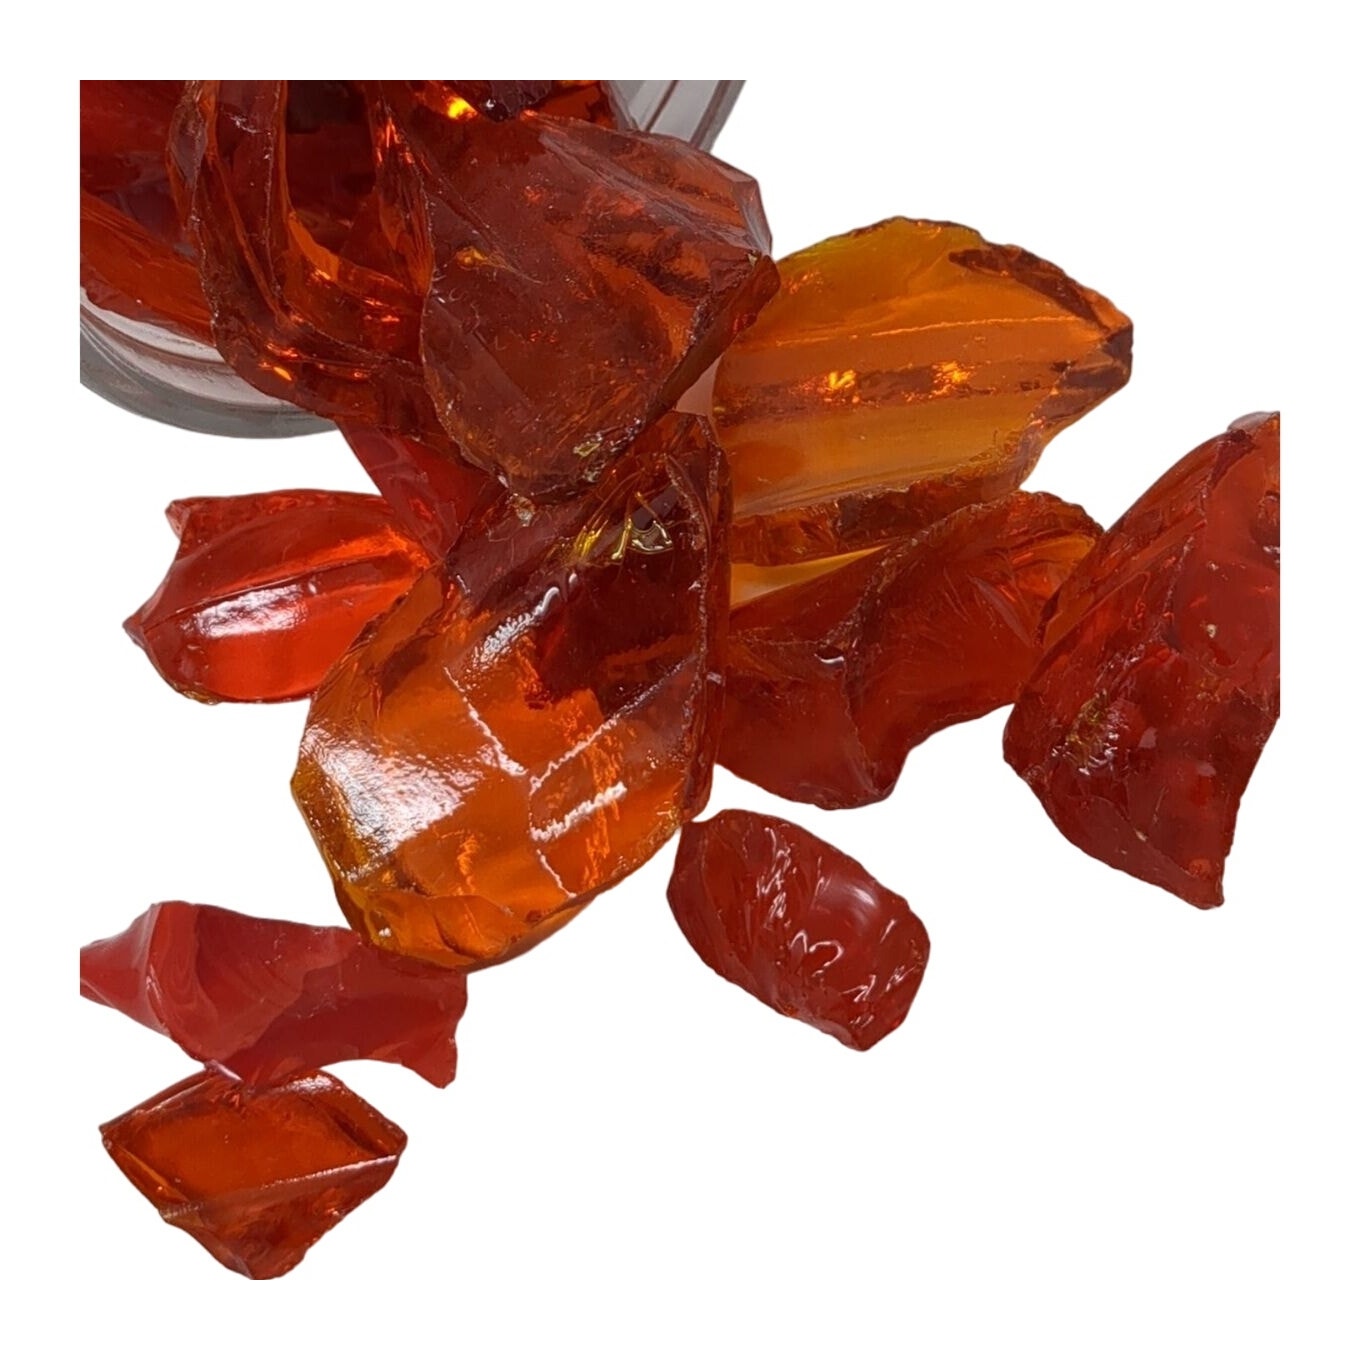 Amberina and Ruby Glass Mixed Cullet Pieces Fragments Half Pint Jar